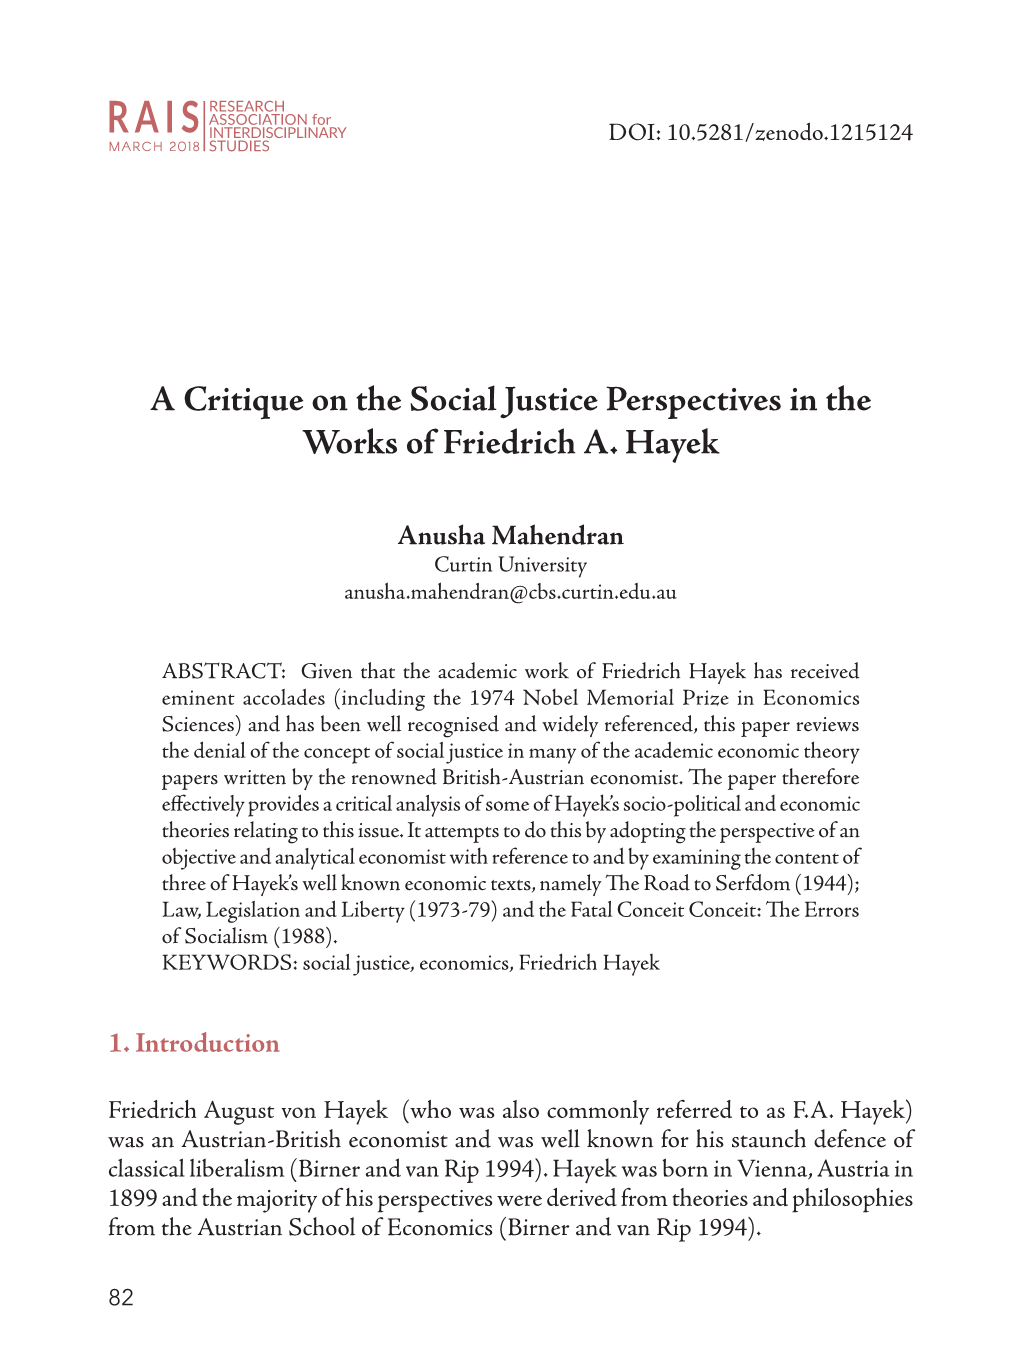 A Critique on the Social Justice Perspectives in the Works of Friedrich A. Hayek